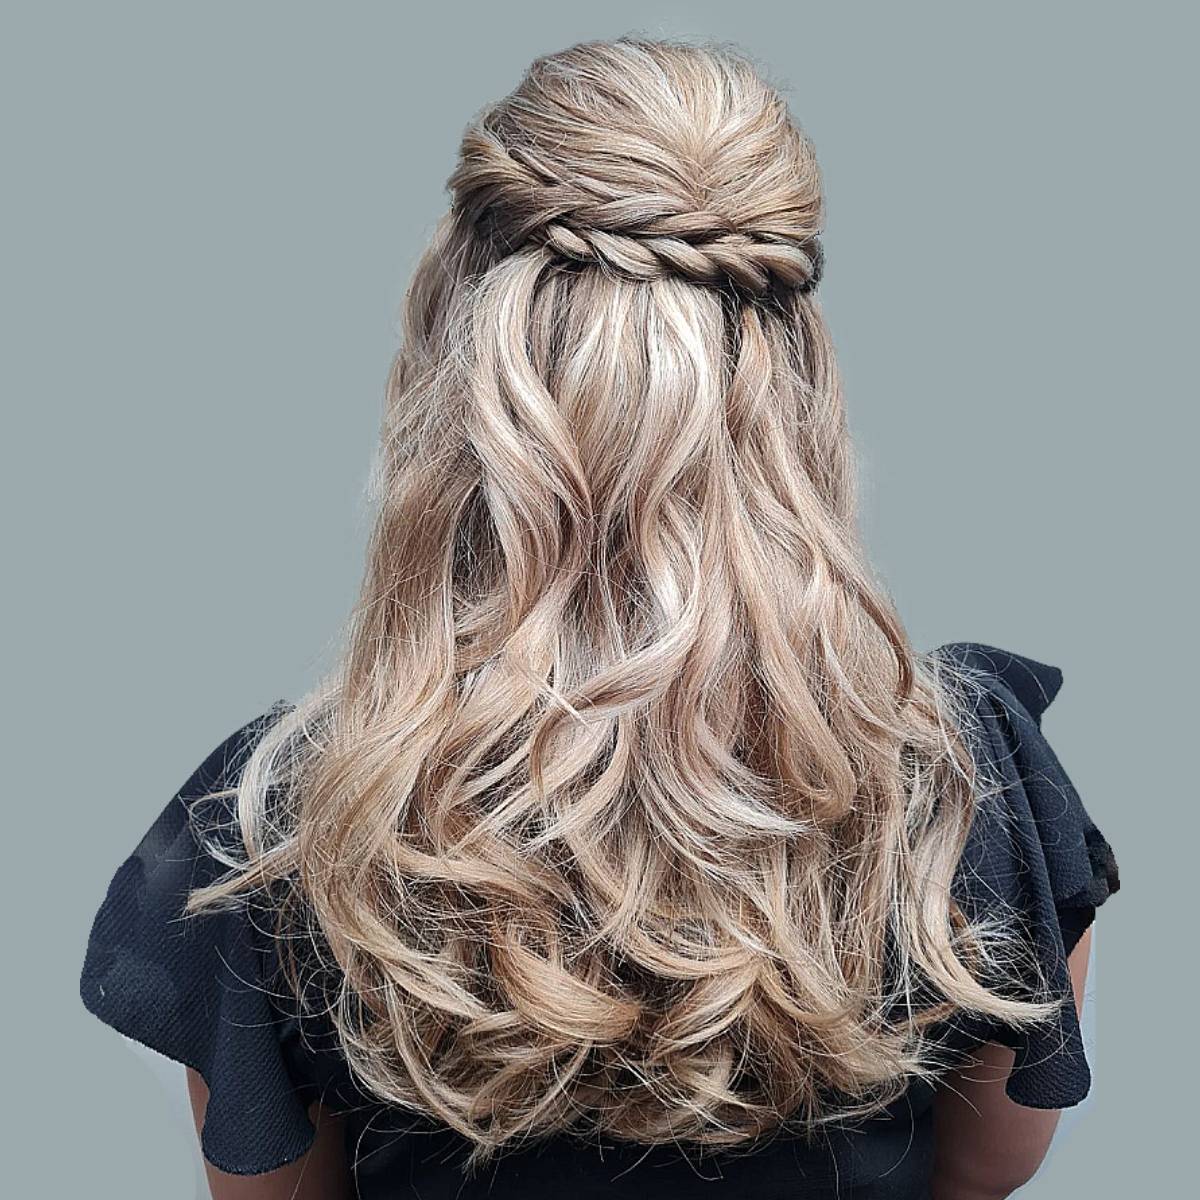 Evening Hairstyles Banquet Hairstyles Formal Hairstyles And More  Luxy  Hair